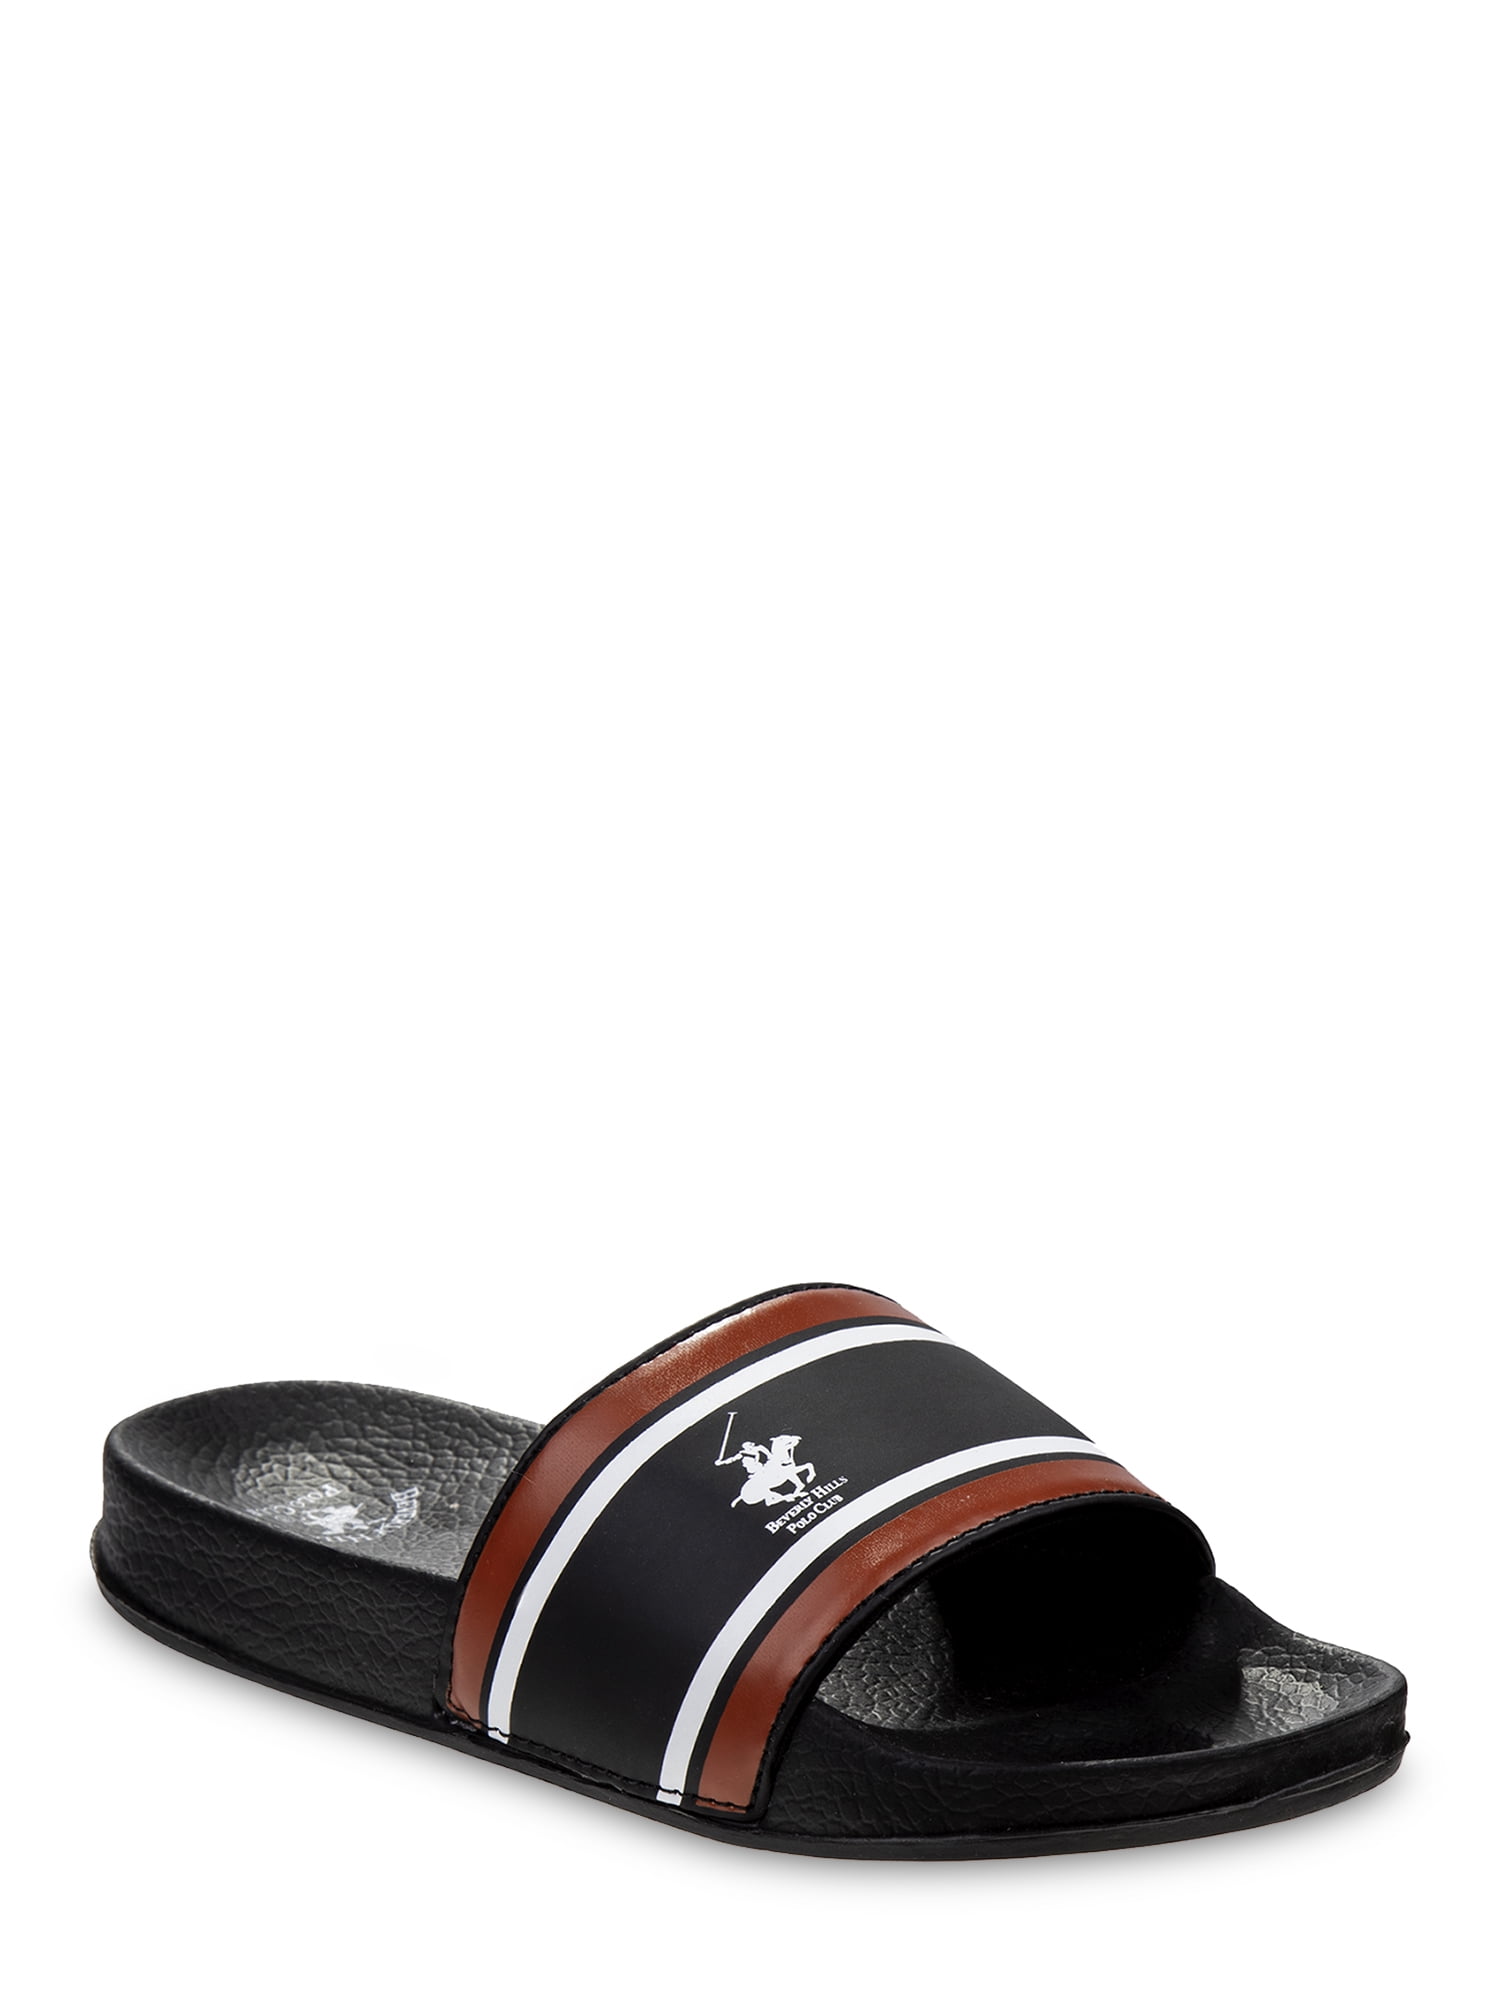 beverly hills polo club slides